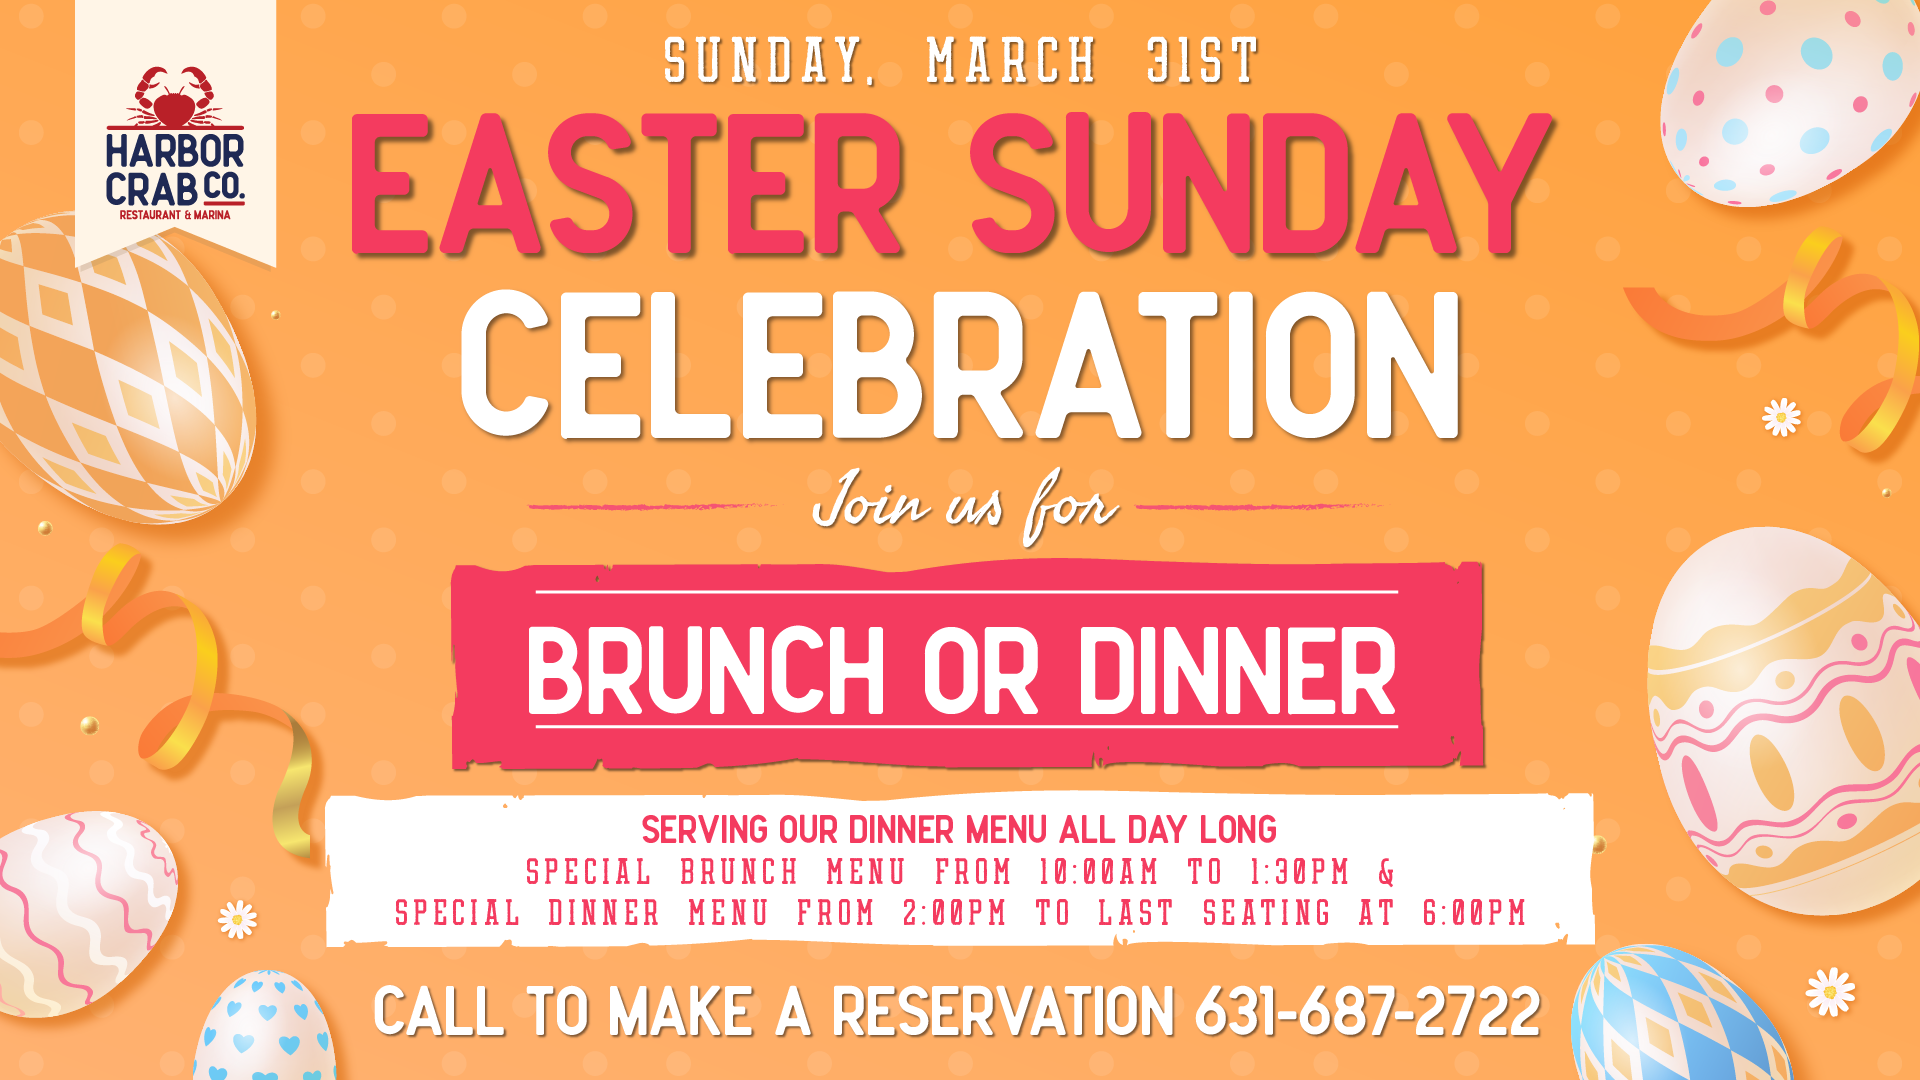 The image promotes Harbor Crab's event on Sunday, March 31st, offering a special brunch and dinner for Easter Sunday celebrations. Details include serving hours for brunch and dinner, with an invitation for guests to call and make a reservation at the provided phone number.